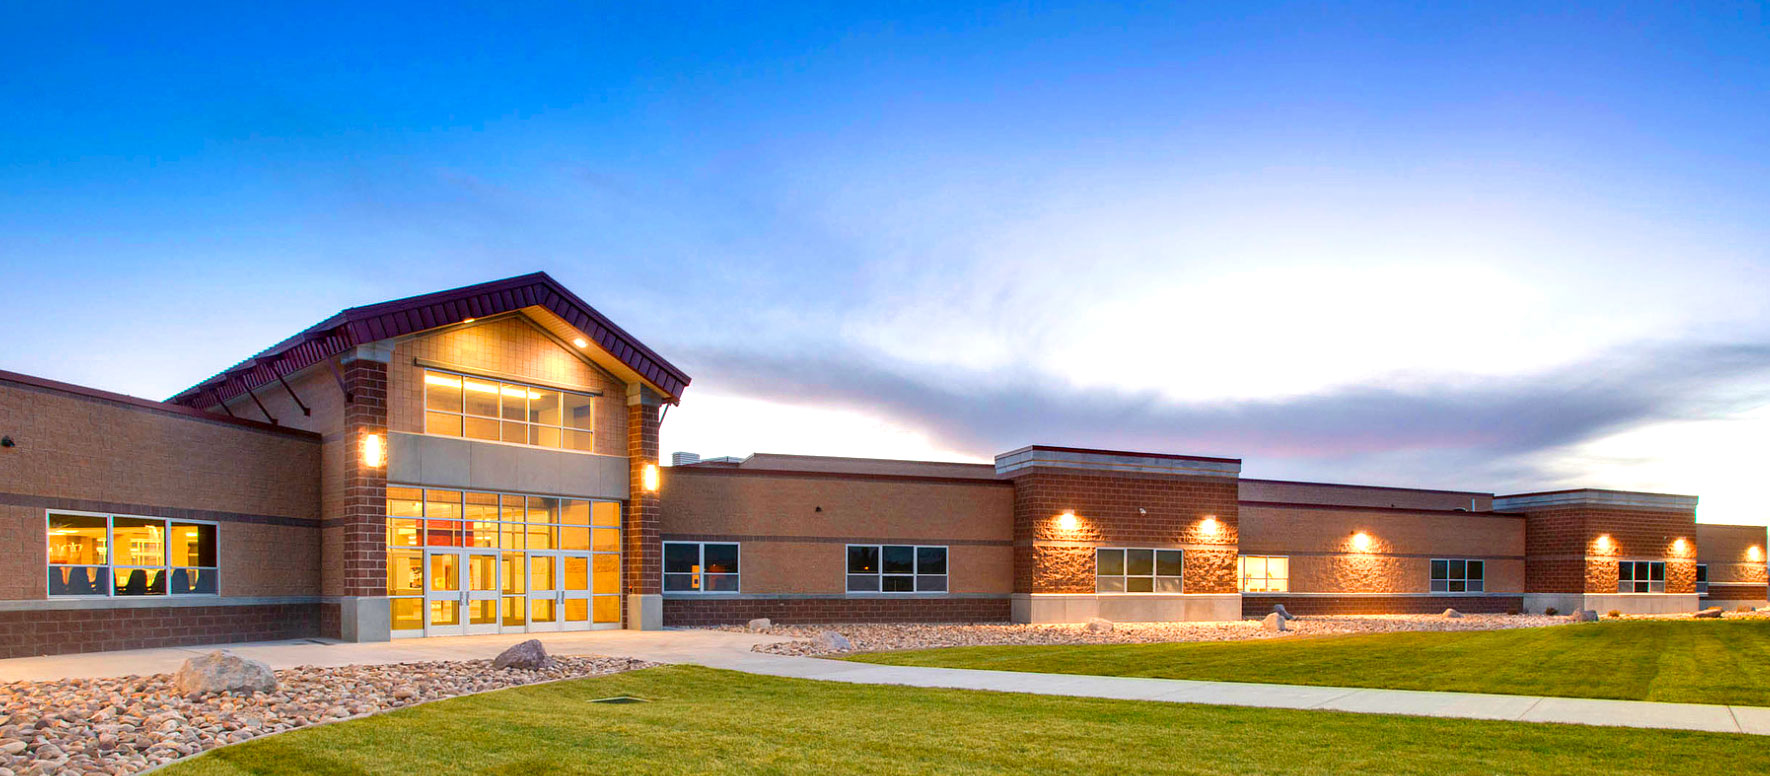 altamont high school at dusk with lights on front entry way